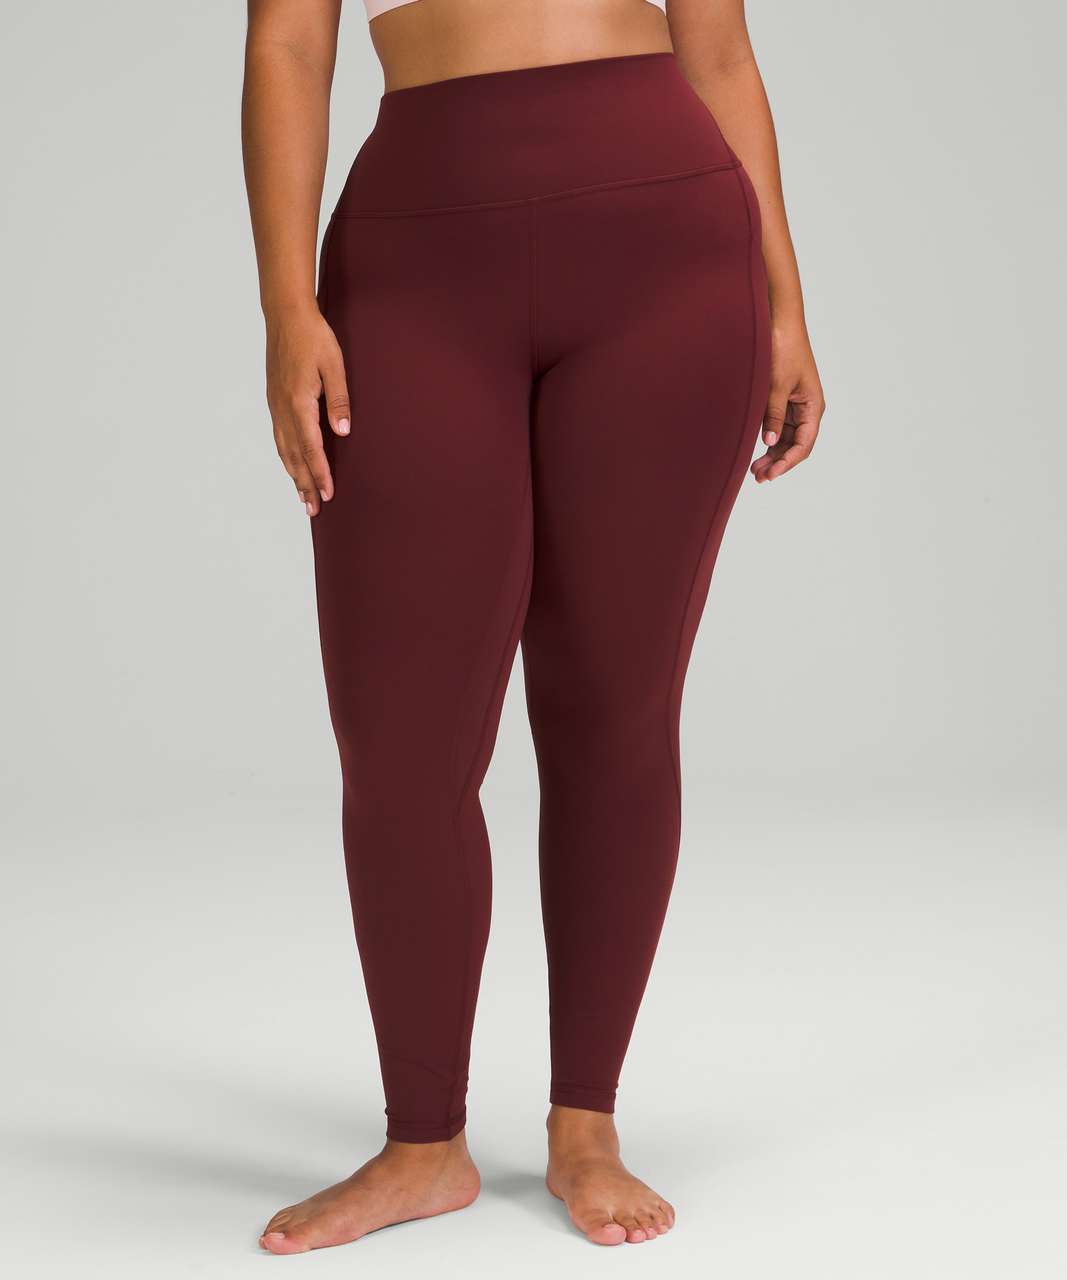 Lululemon Align High-Rise Pant with Pockets 28 - Red Merlot